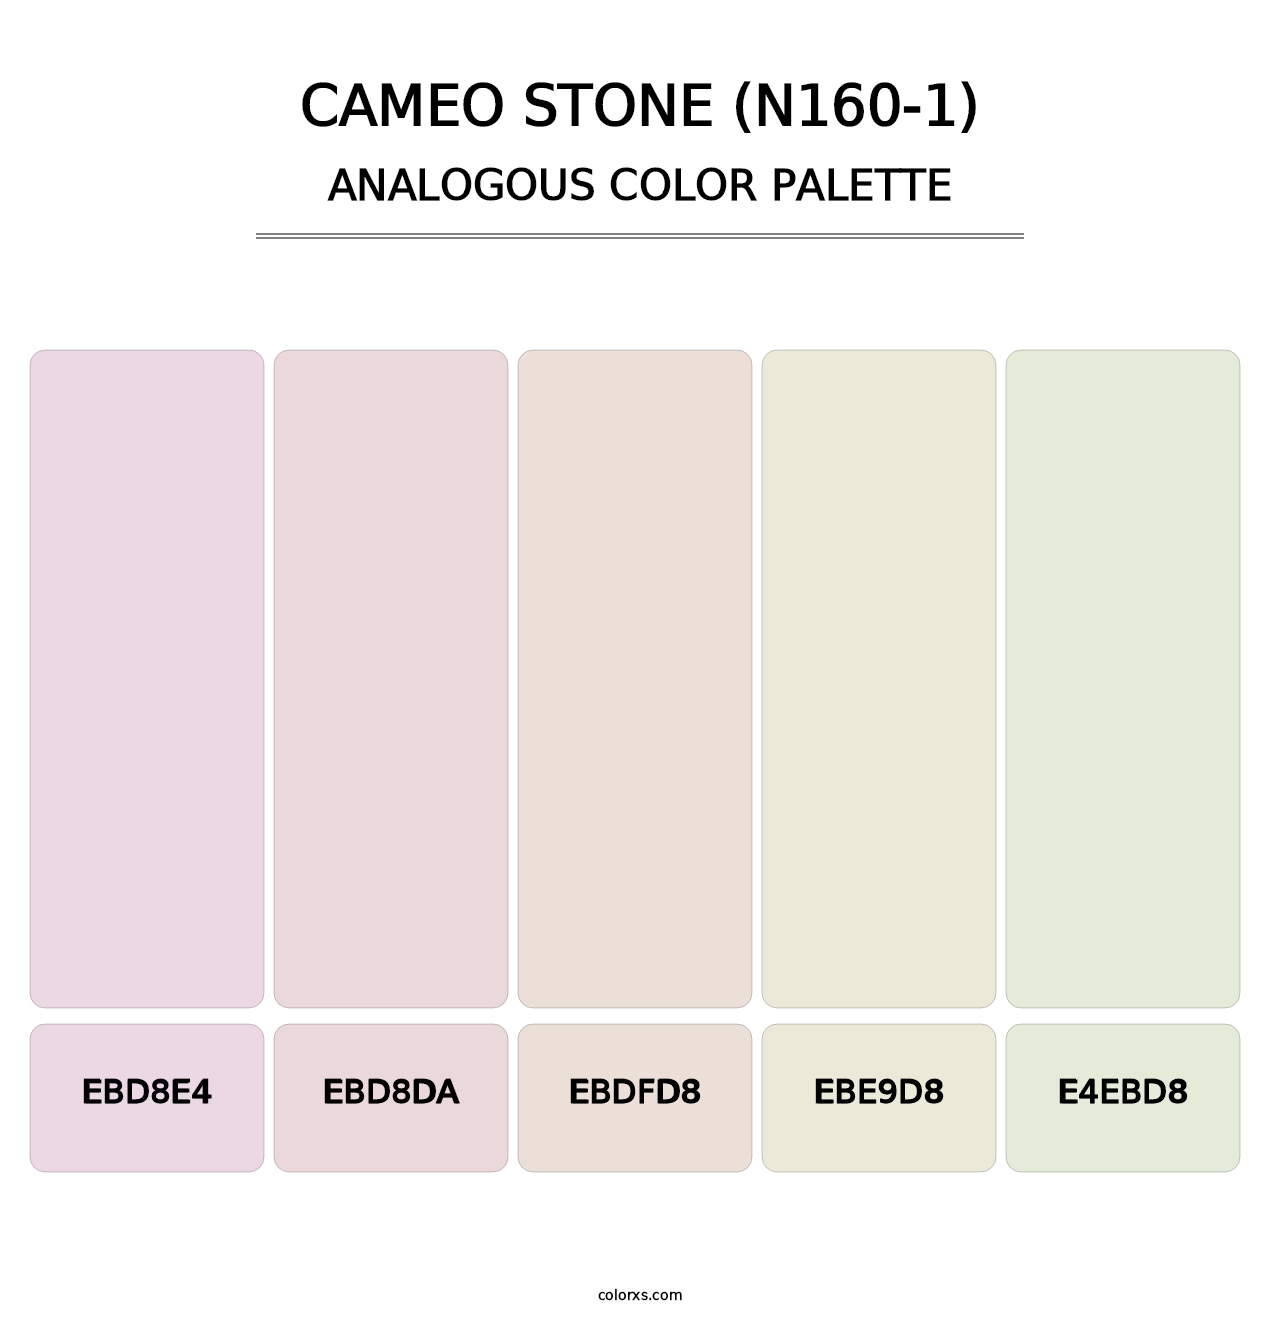 Cameo Stone (N160-1) - Analogous Color Palette